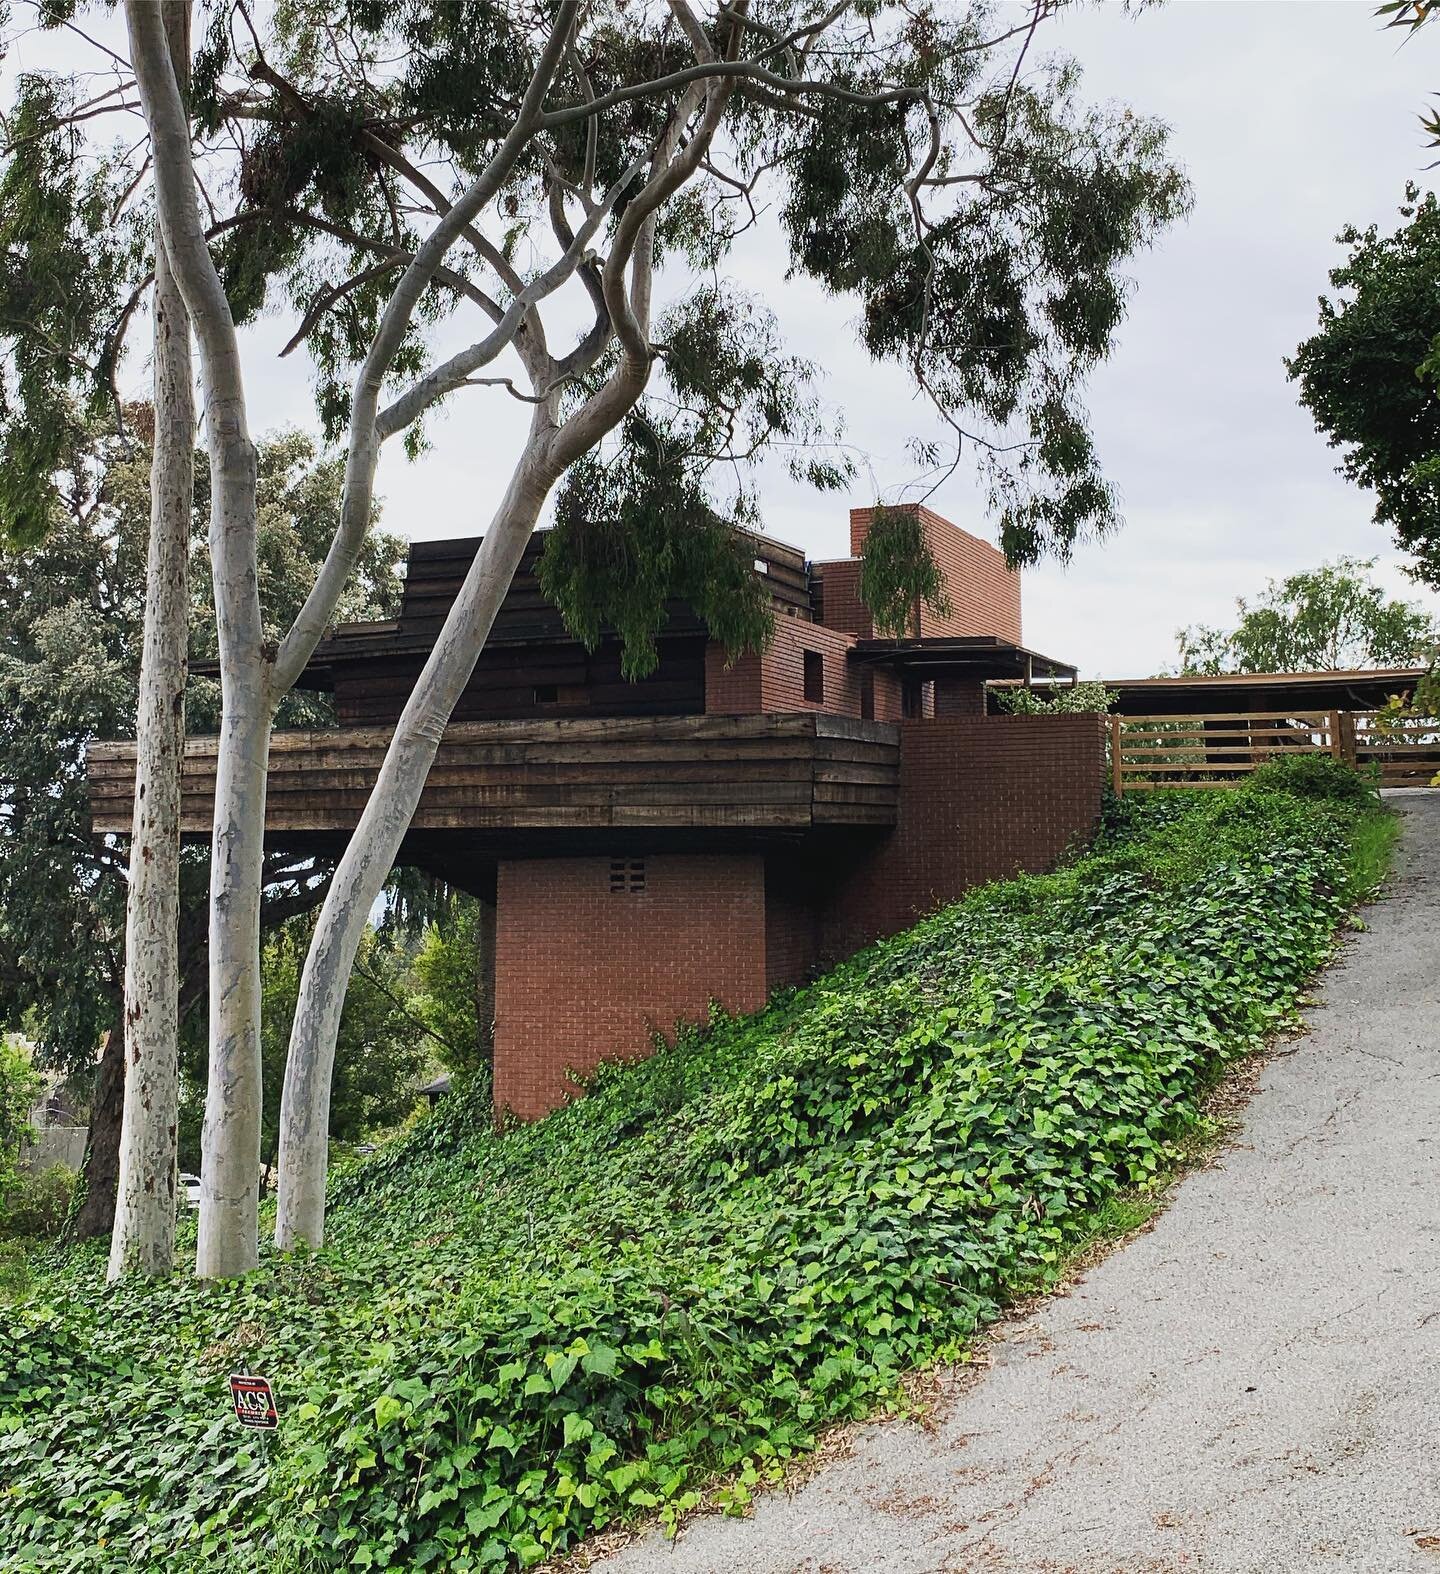 Thinking a lot about Frank Lloyd Wright houses lately. Our first cultural &lsquo;outing&rsquo; of the pandemic was a FLW house driveby tour. DM for details!